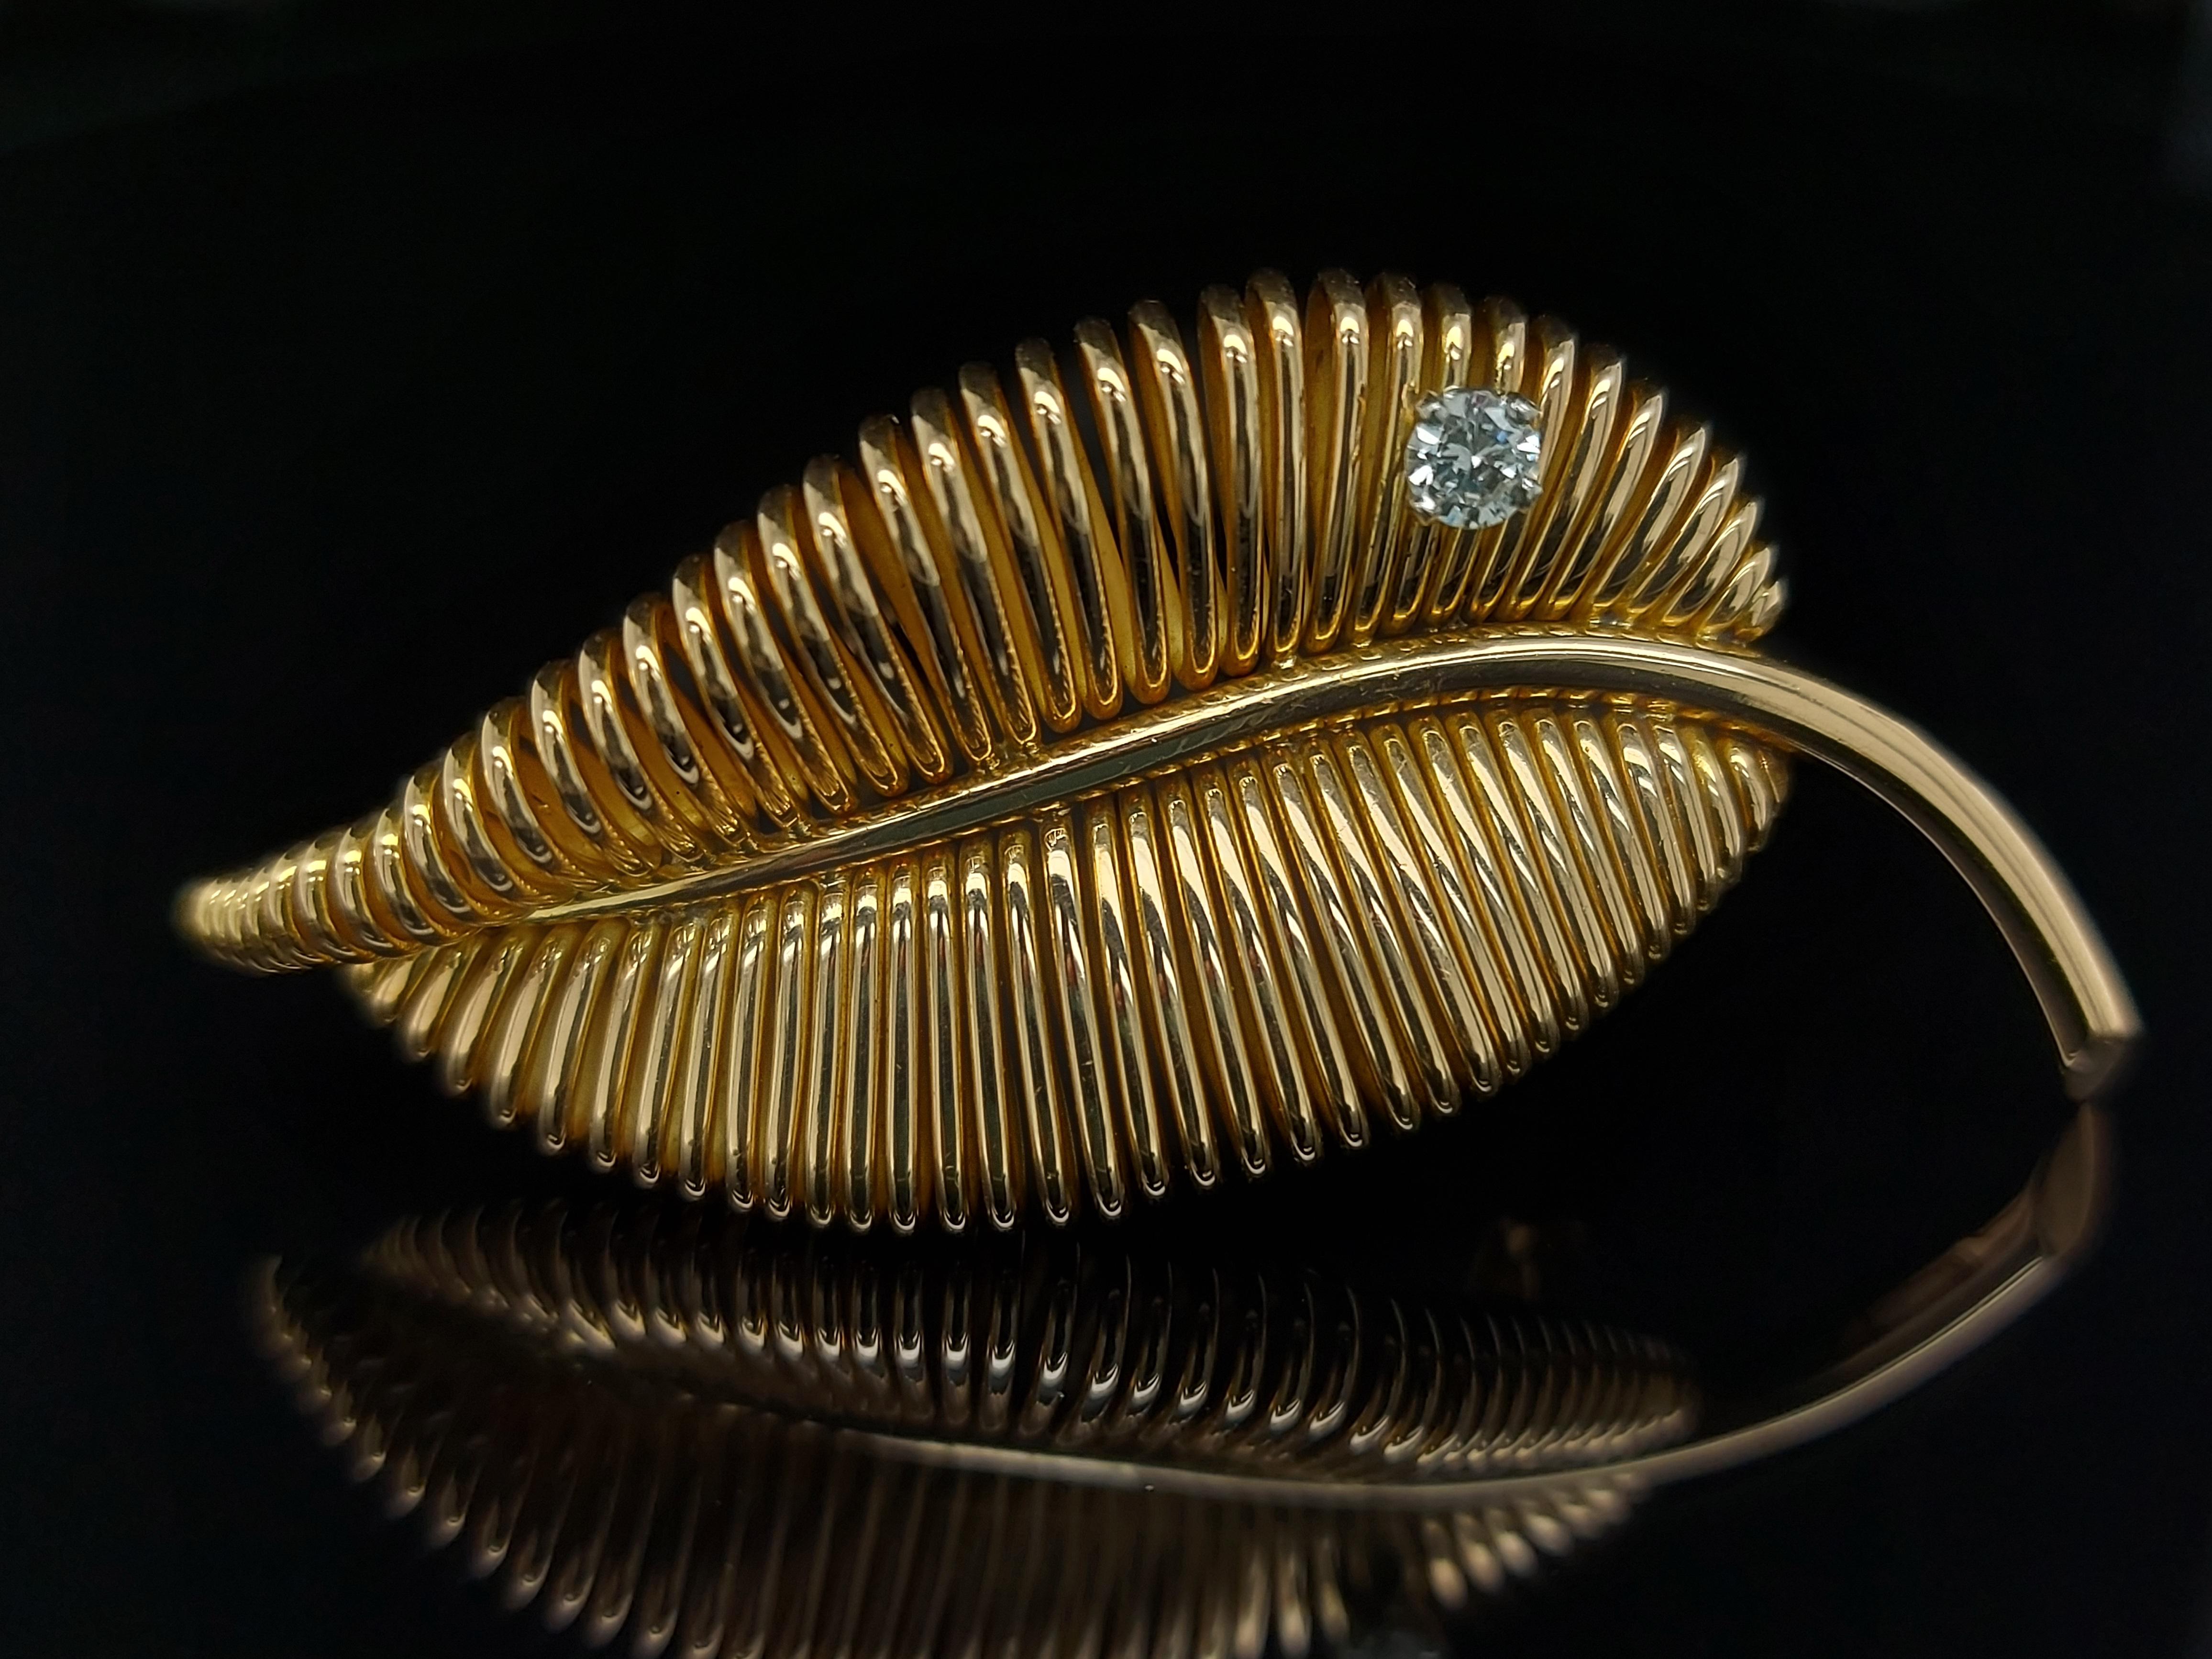 18Kt Yellow Gold Mauboussin Paris Leaf Pin / Brooch From the 1940

Diamonds: 1 brilliant cut diamond

Material: 18 kt yellow gold

Total weight: 16 gram / 0.565 oz / 10.3 dwt

Measurements: Length 23.5mm x Height 49mm x 8.2mm 

About Mauboussin